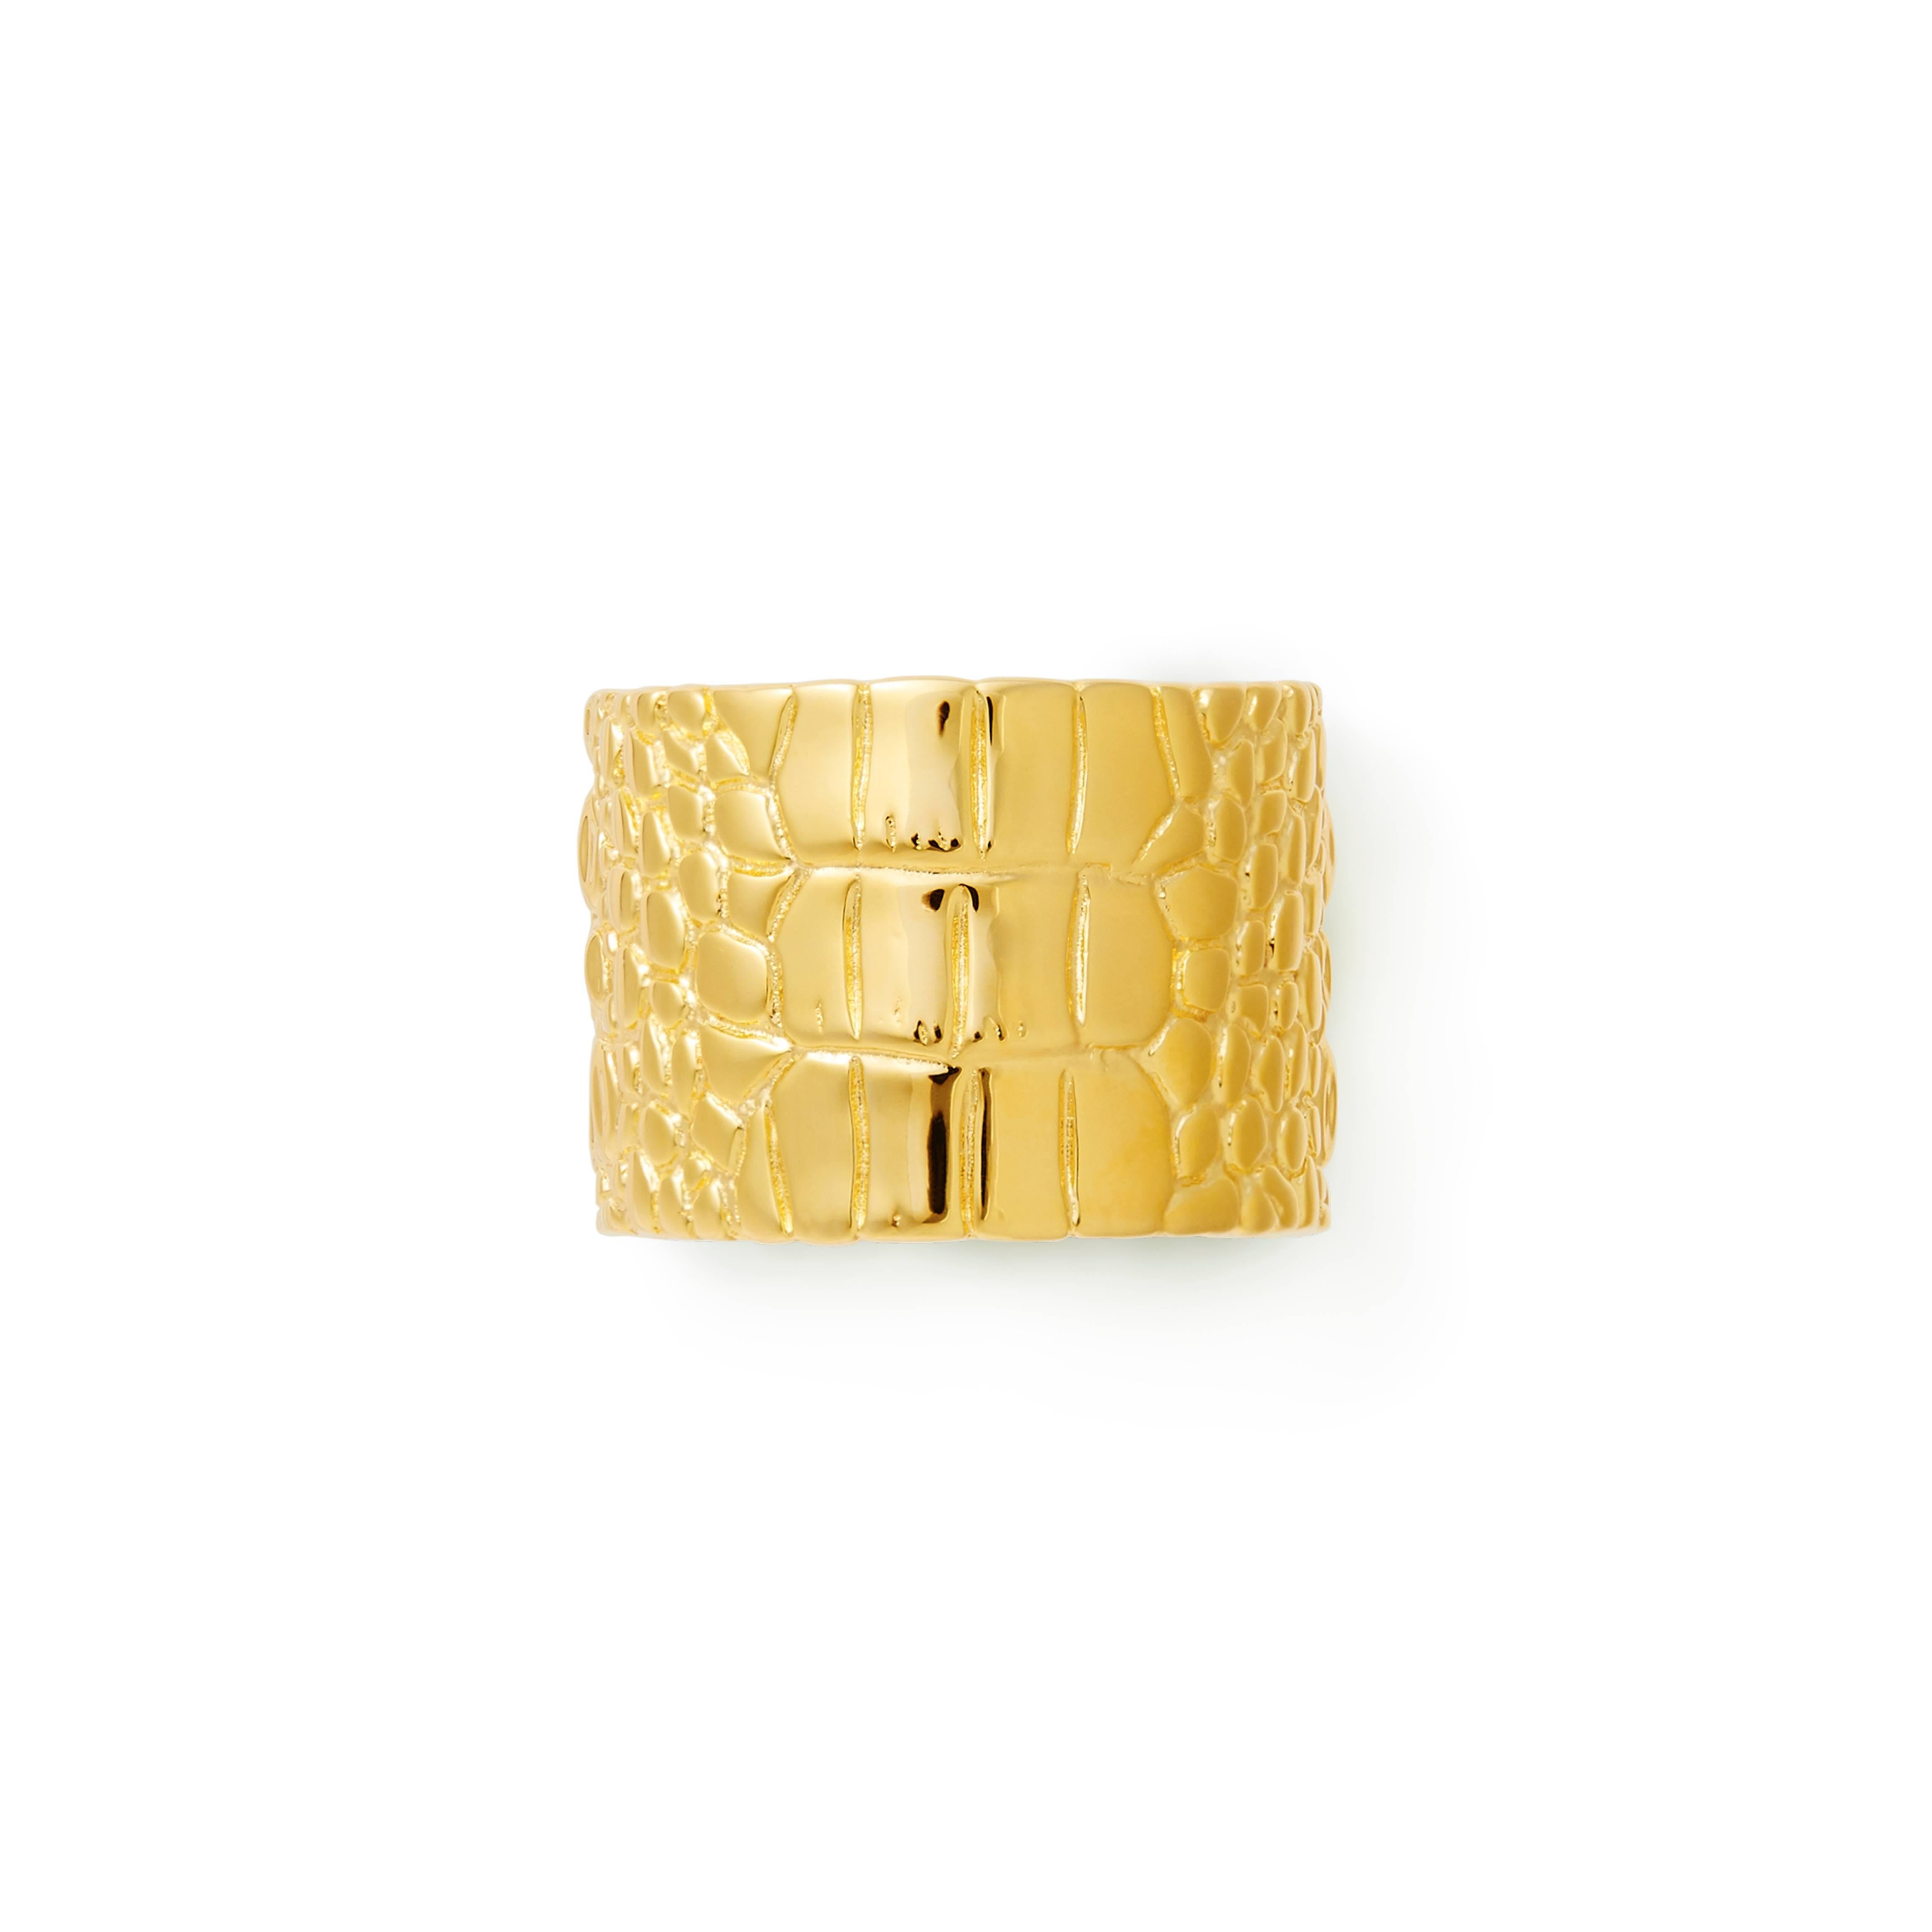 The 18k Gold Croco ring, by Mistova is made from the finest gold with a beautiful croco texture. This piece is from the NOVA 02 collection, which took inspiration from the characteristics of the crocodile, an animal with one of the most complex